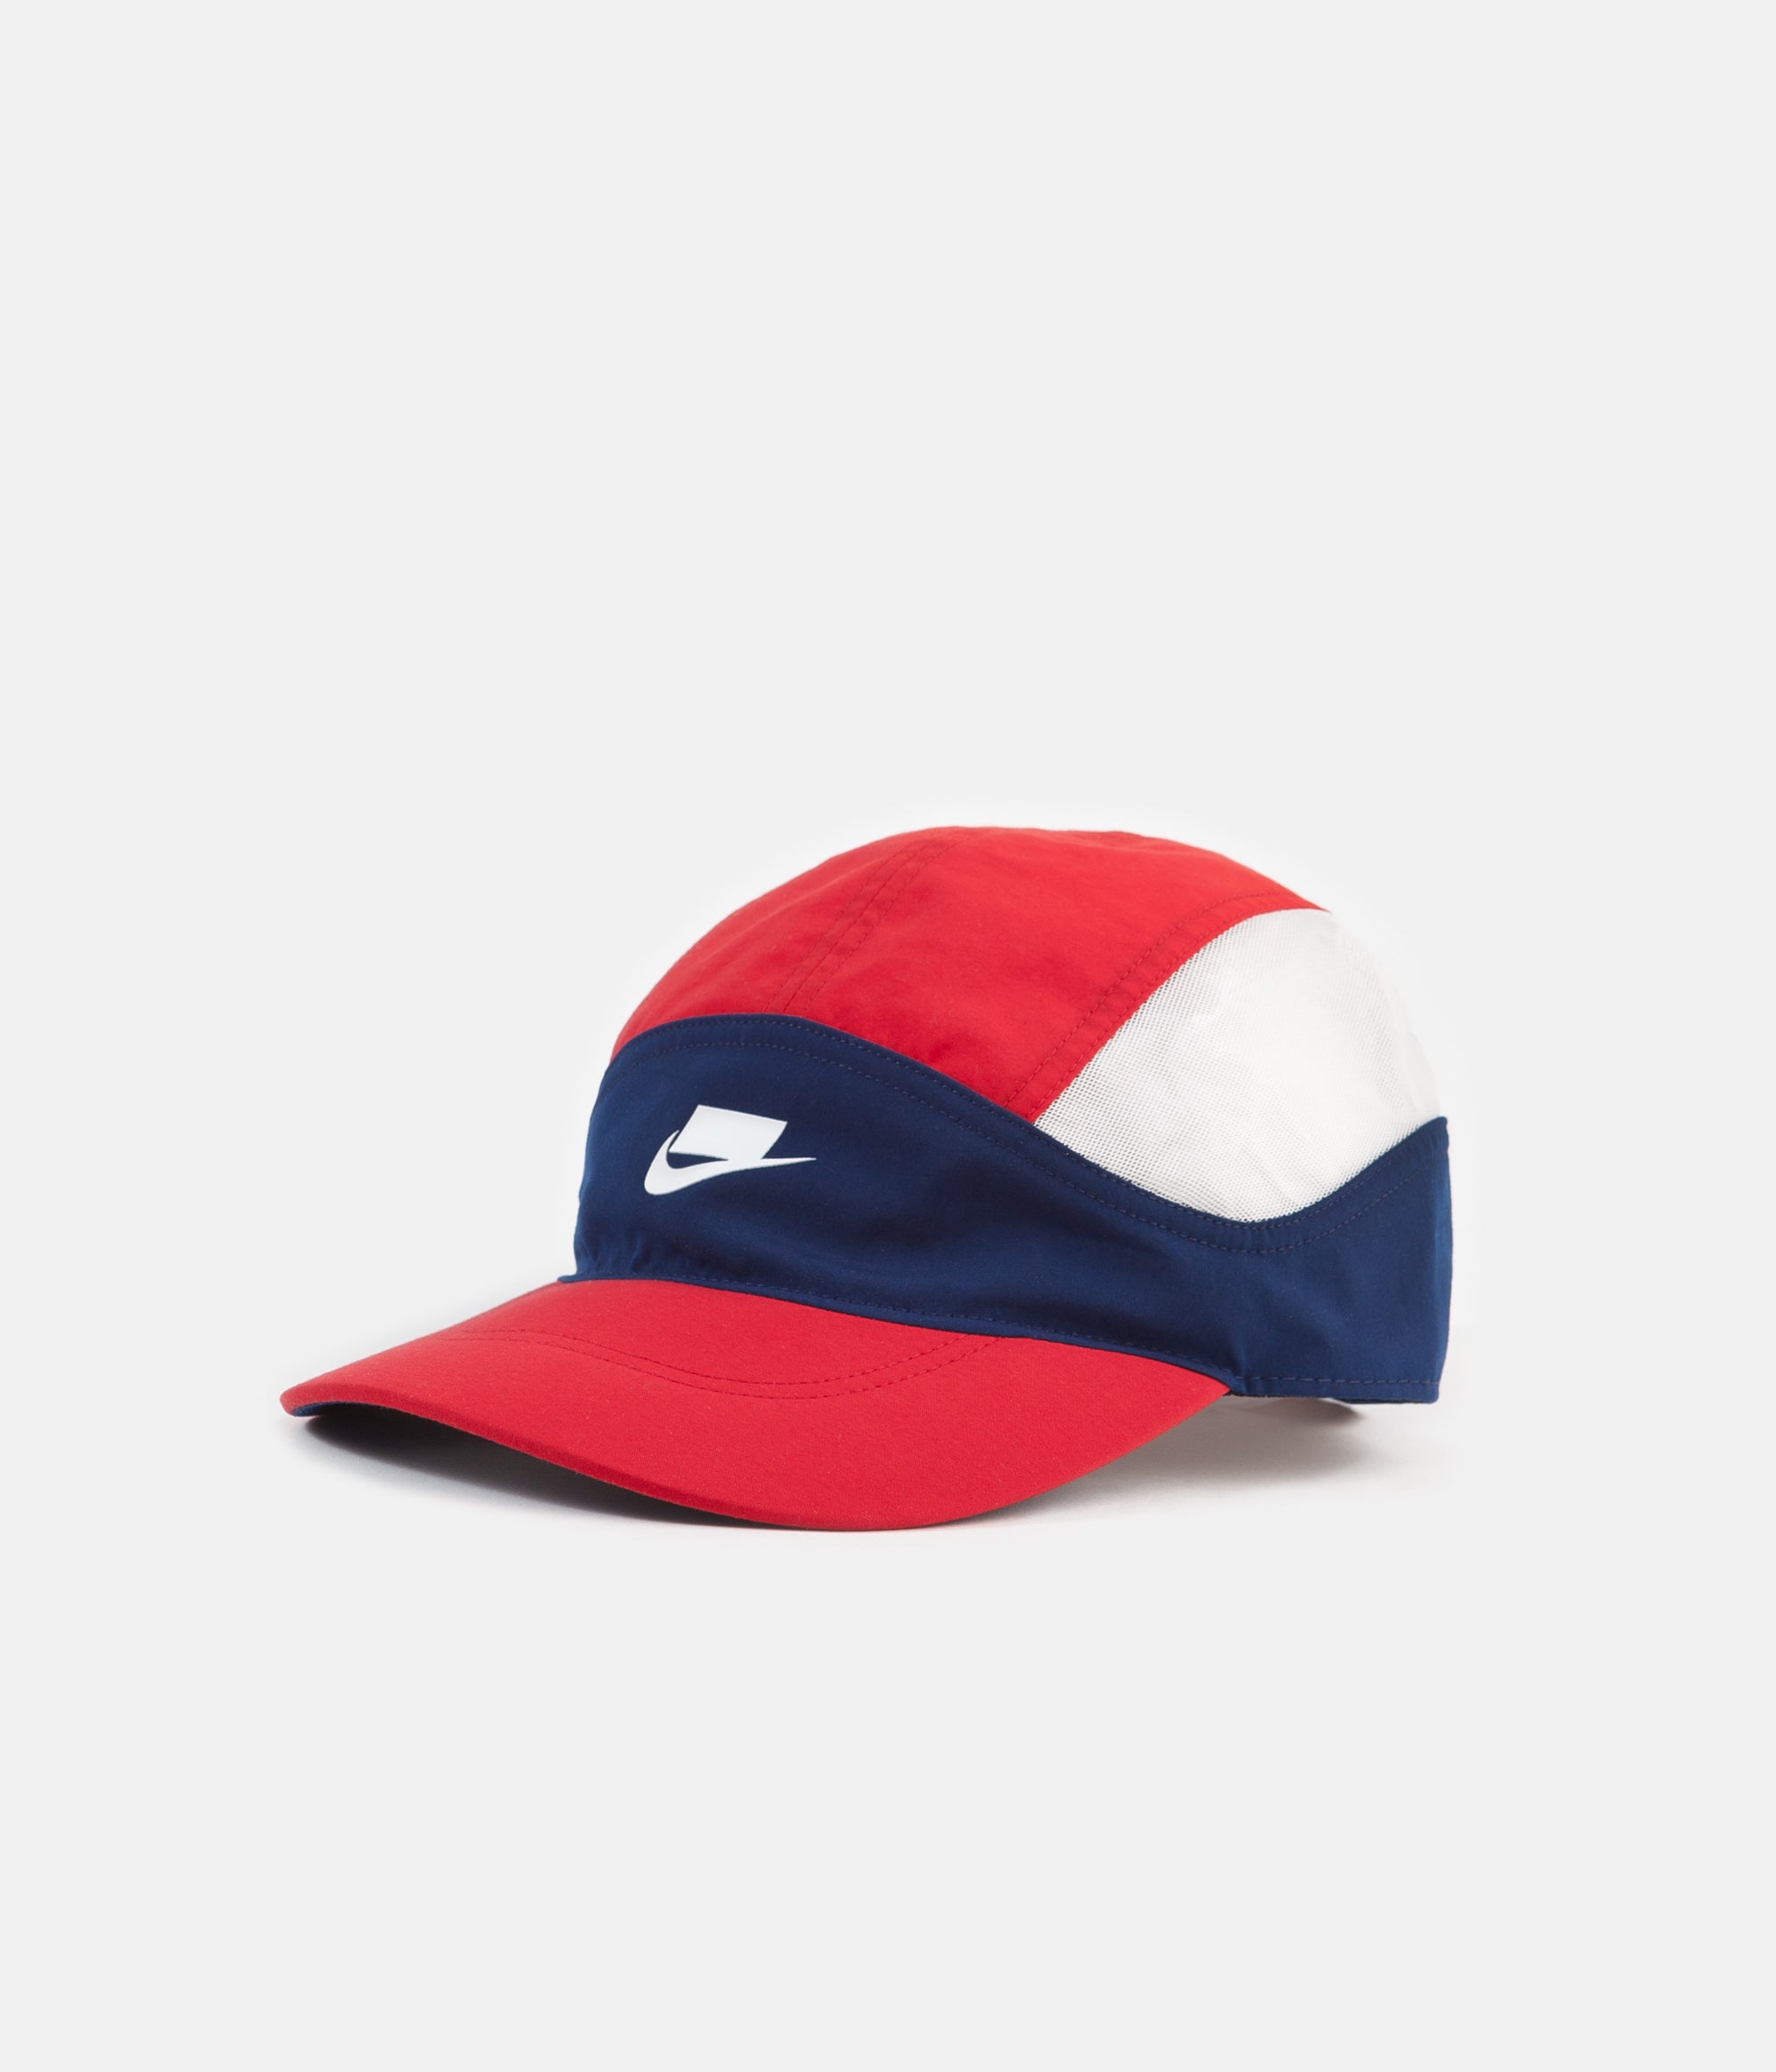 red white and blue nike hat